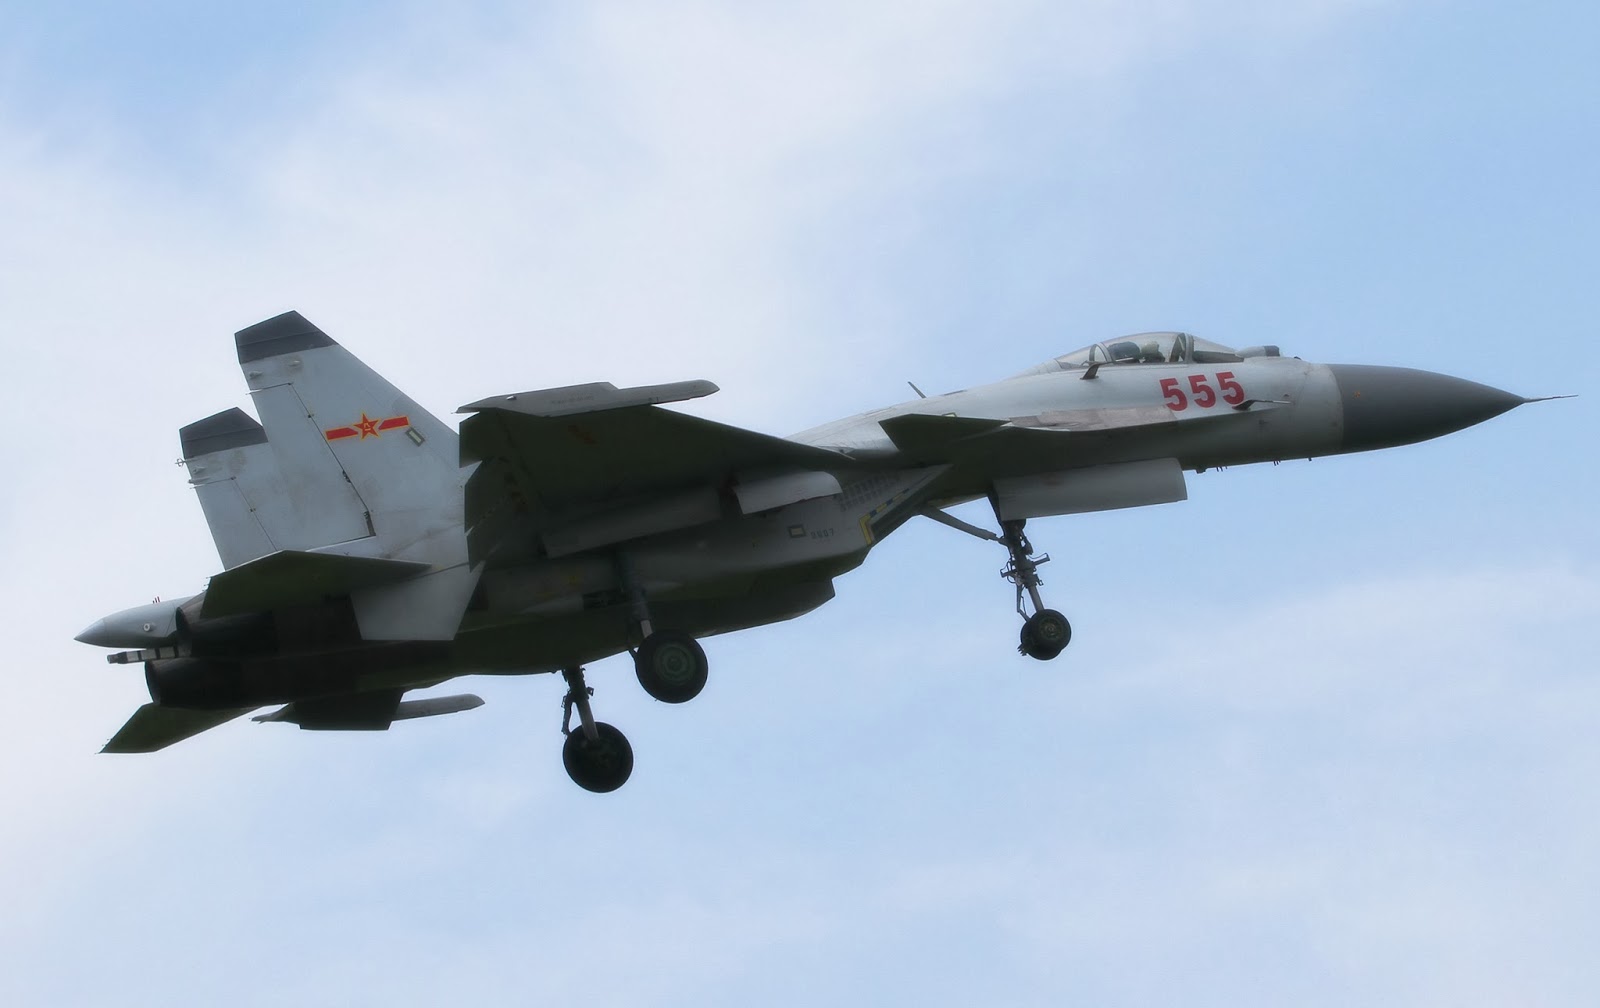 Shenyang J-15 - Página 2 China%E2%80%99s+first+carrier-borne+J15+fighter+jets+were+displayed+for+public+to+see+Wednesday+in+Xi%E2%80%99an+of+northwest+China%E2%80%99s+Shaanxi+Province+(1)